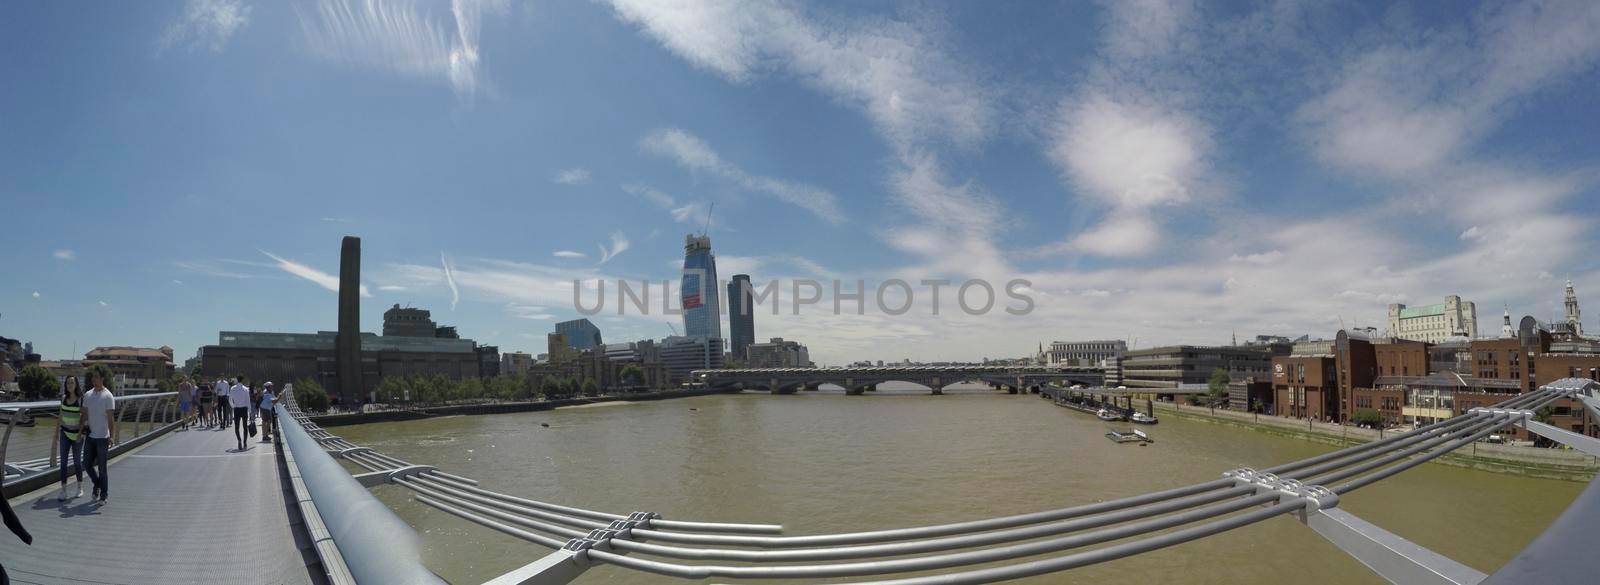 View from Millennium Bridge towards The Shard and Tower Bridge on a beautiful sunny day in London, England